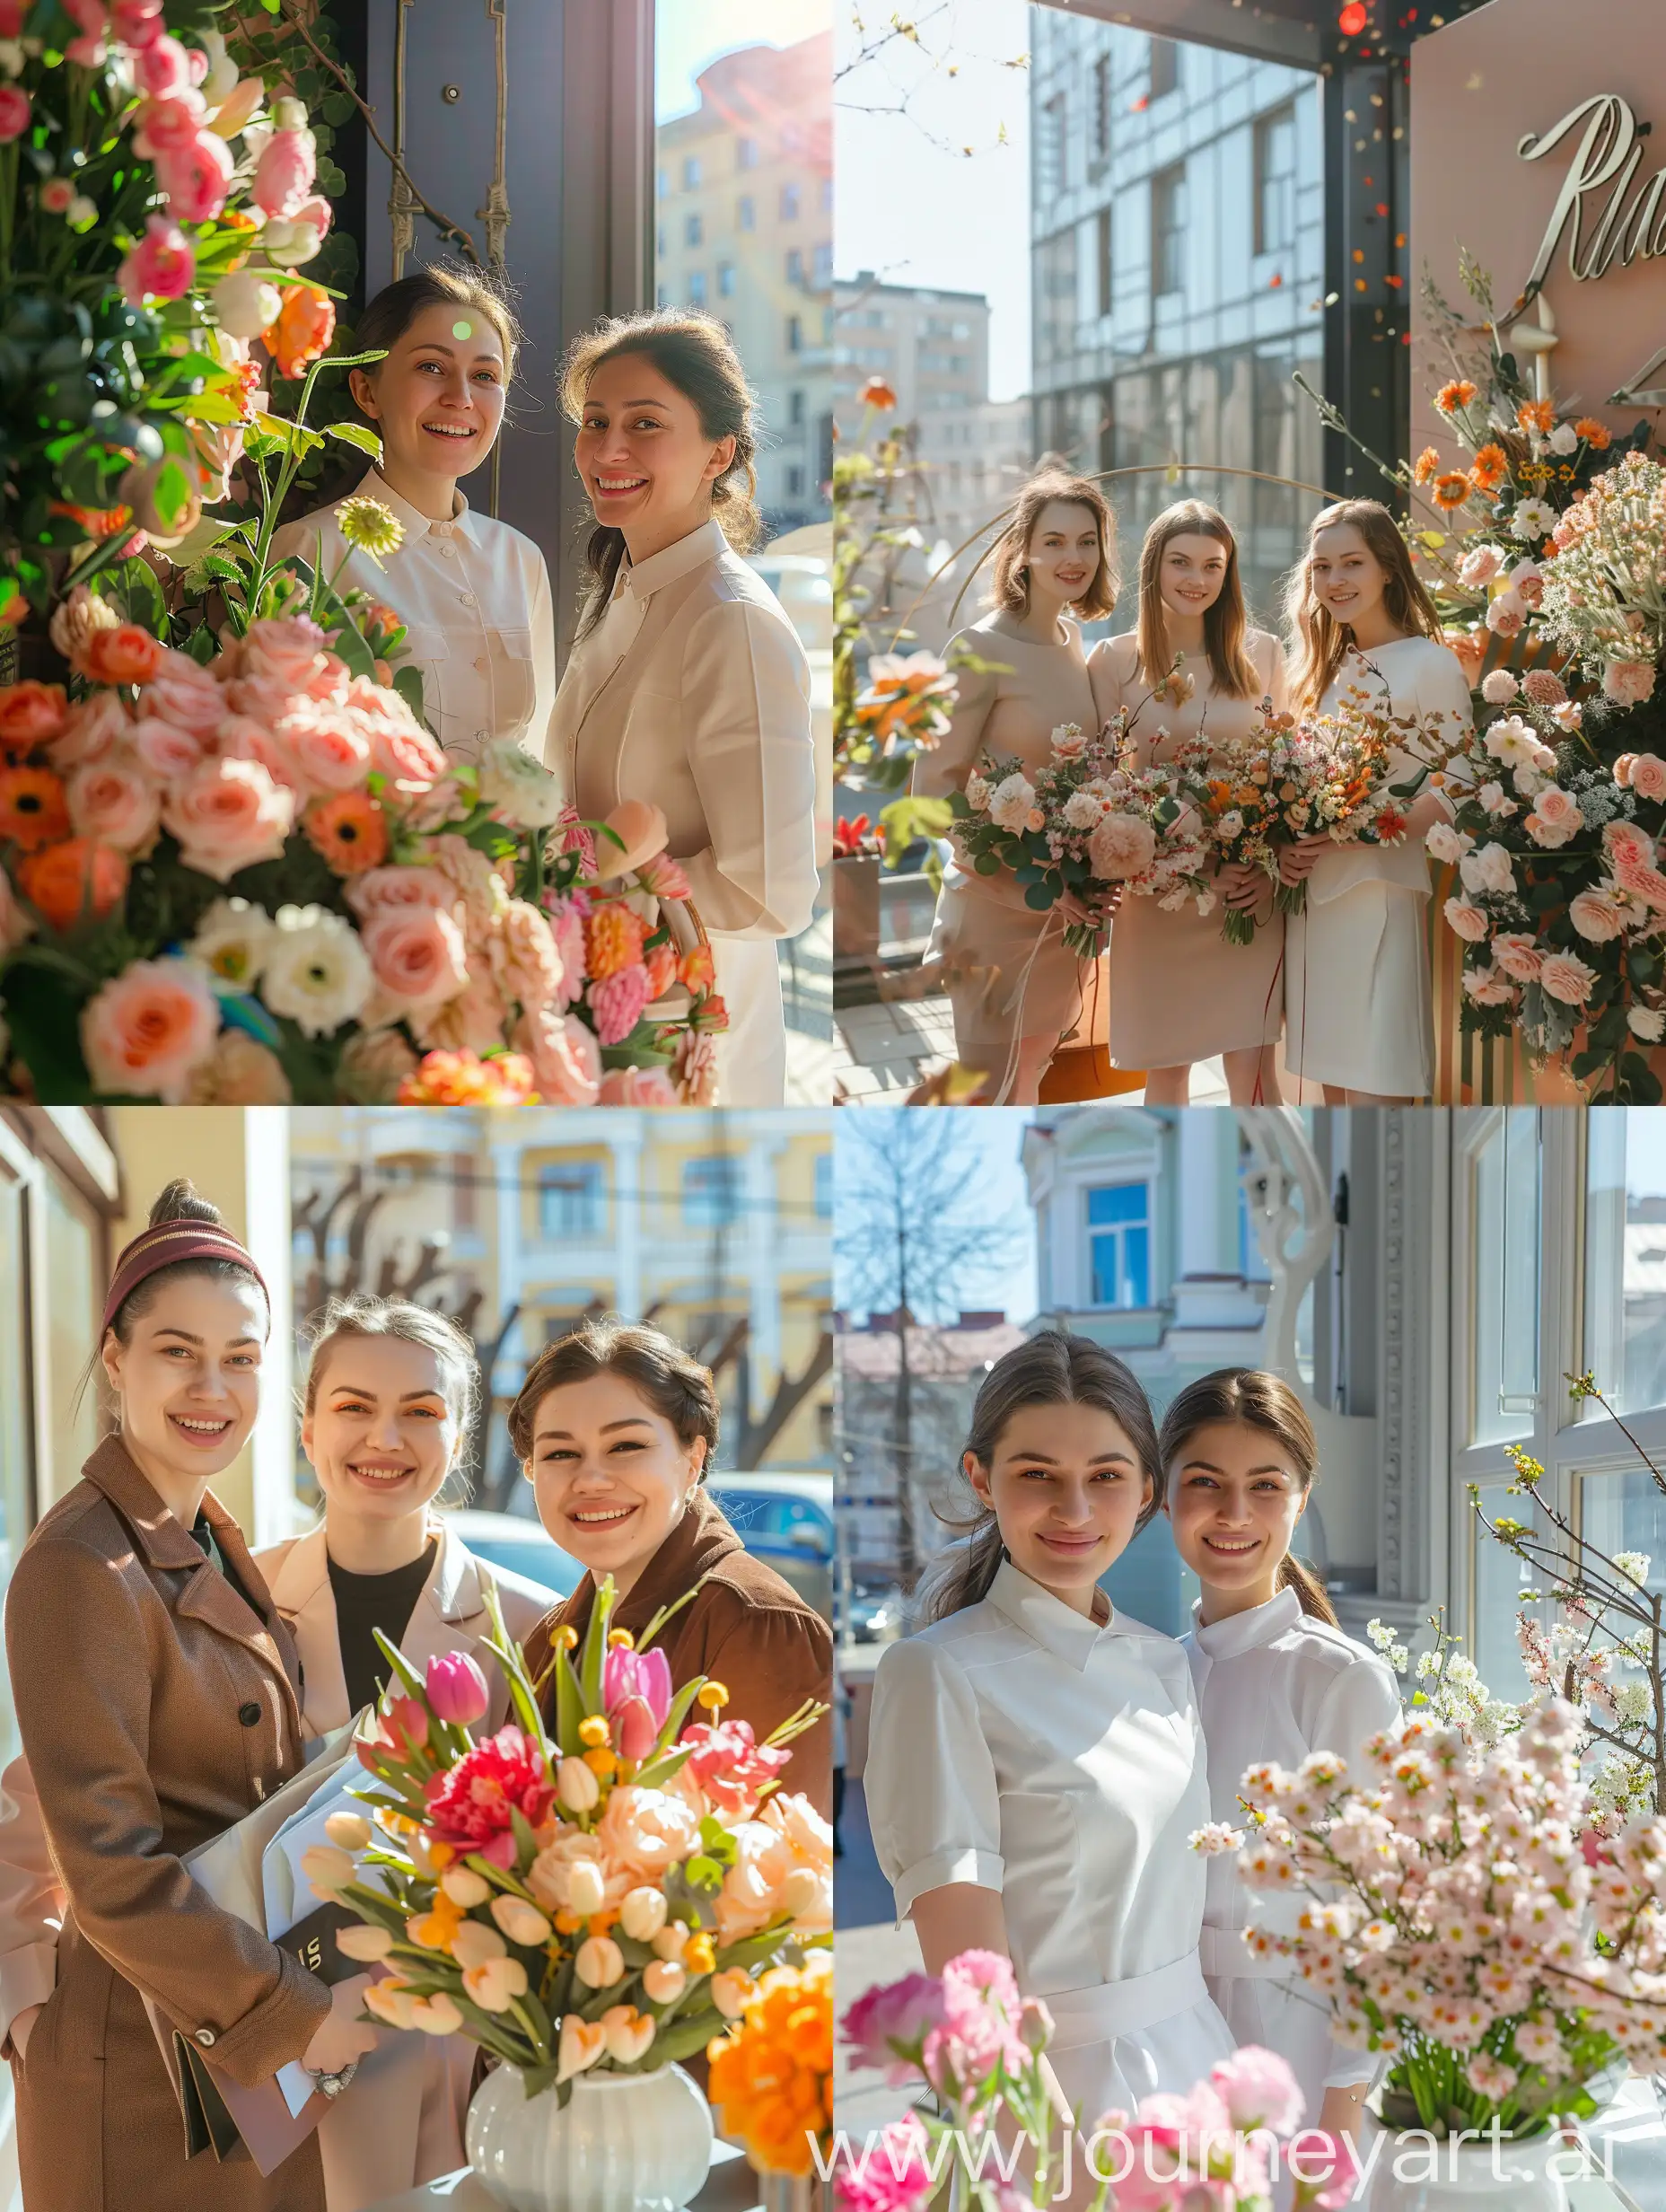 Radisson Hotel staff in russia, Women's Day beautuful decorations, flovers, happy women, bright sunny spring day